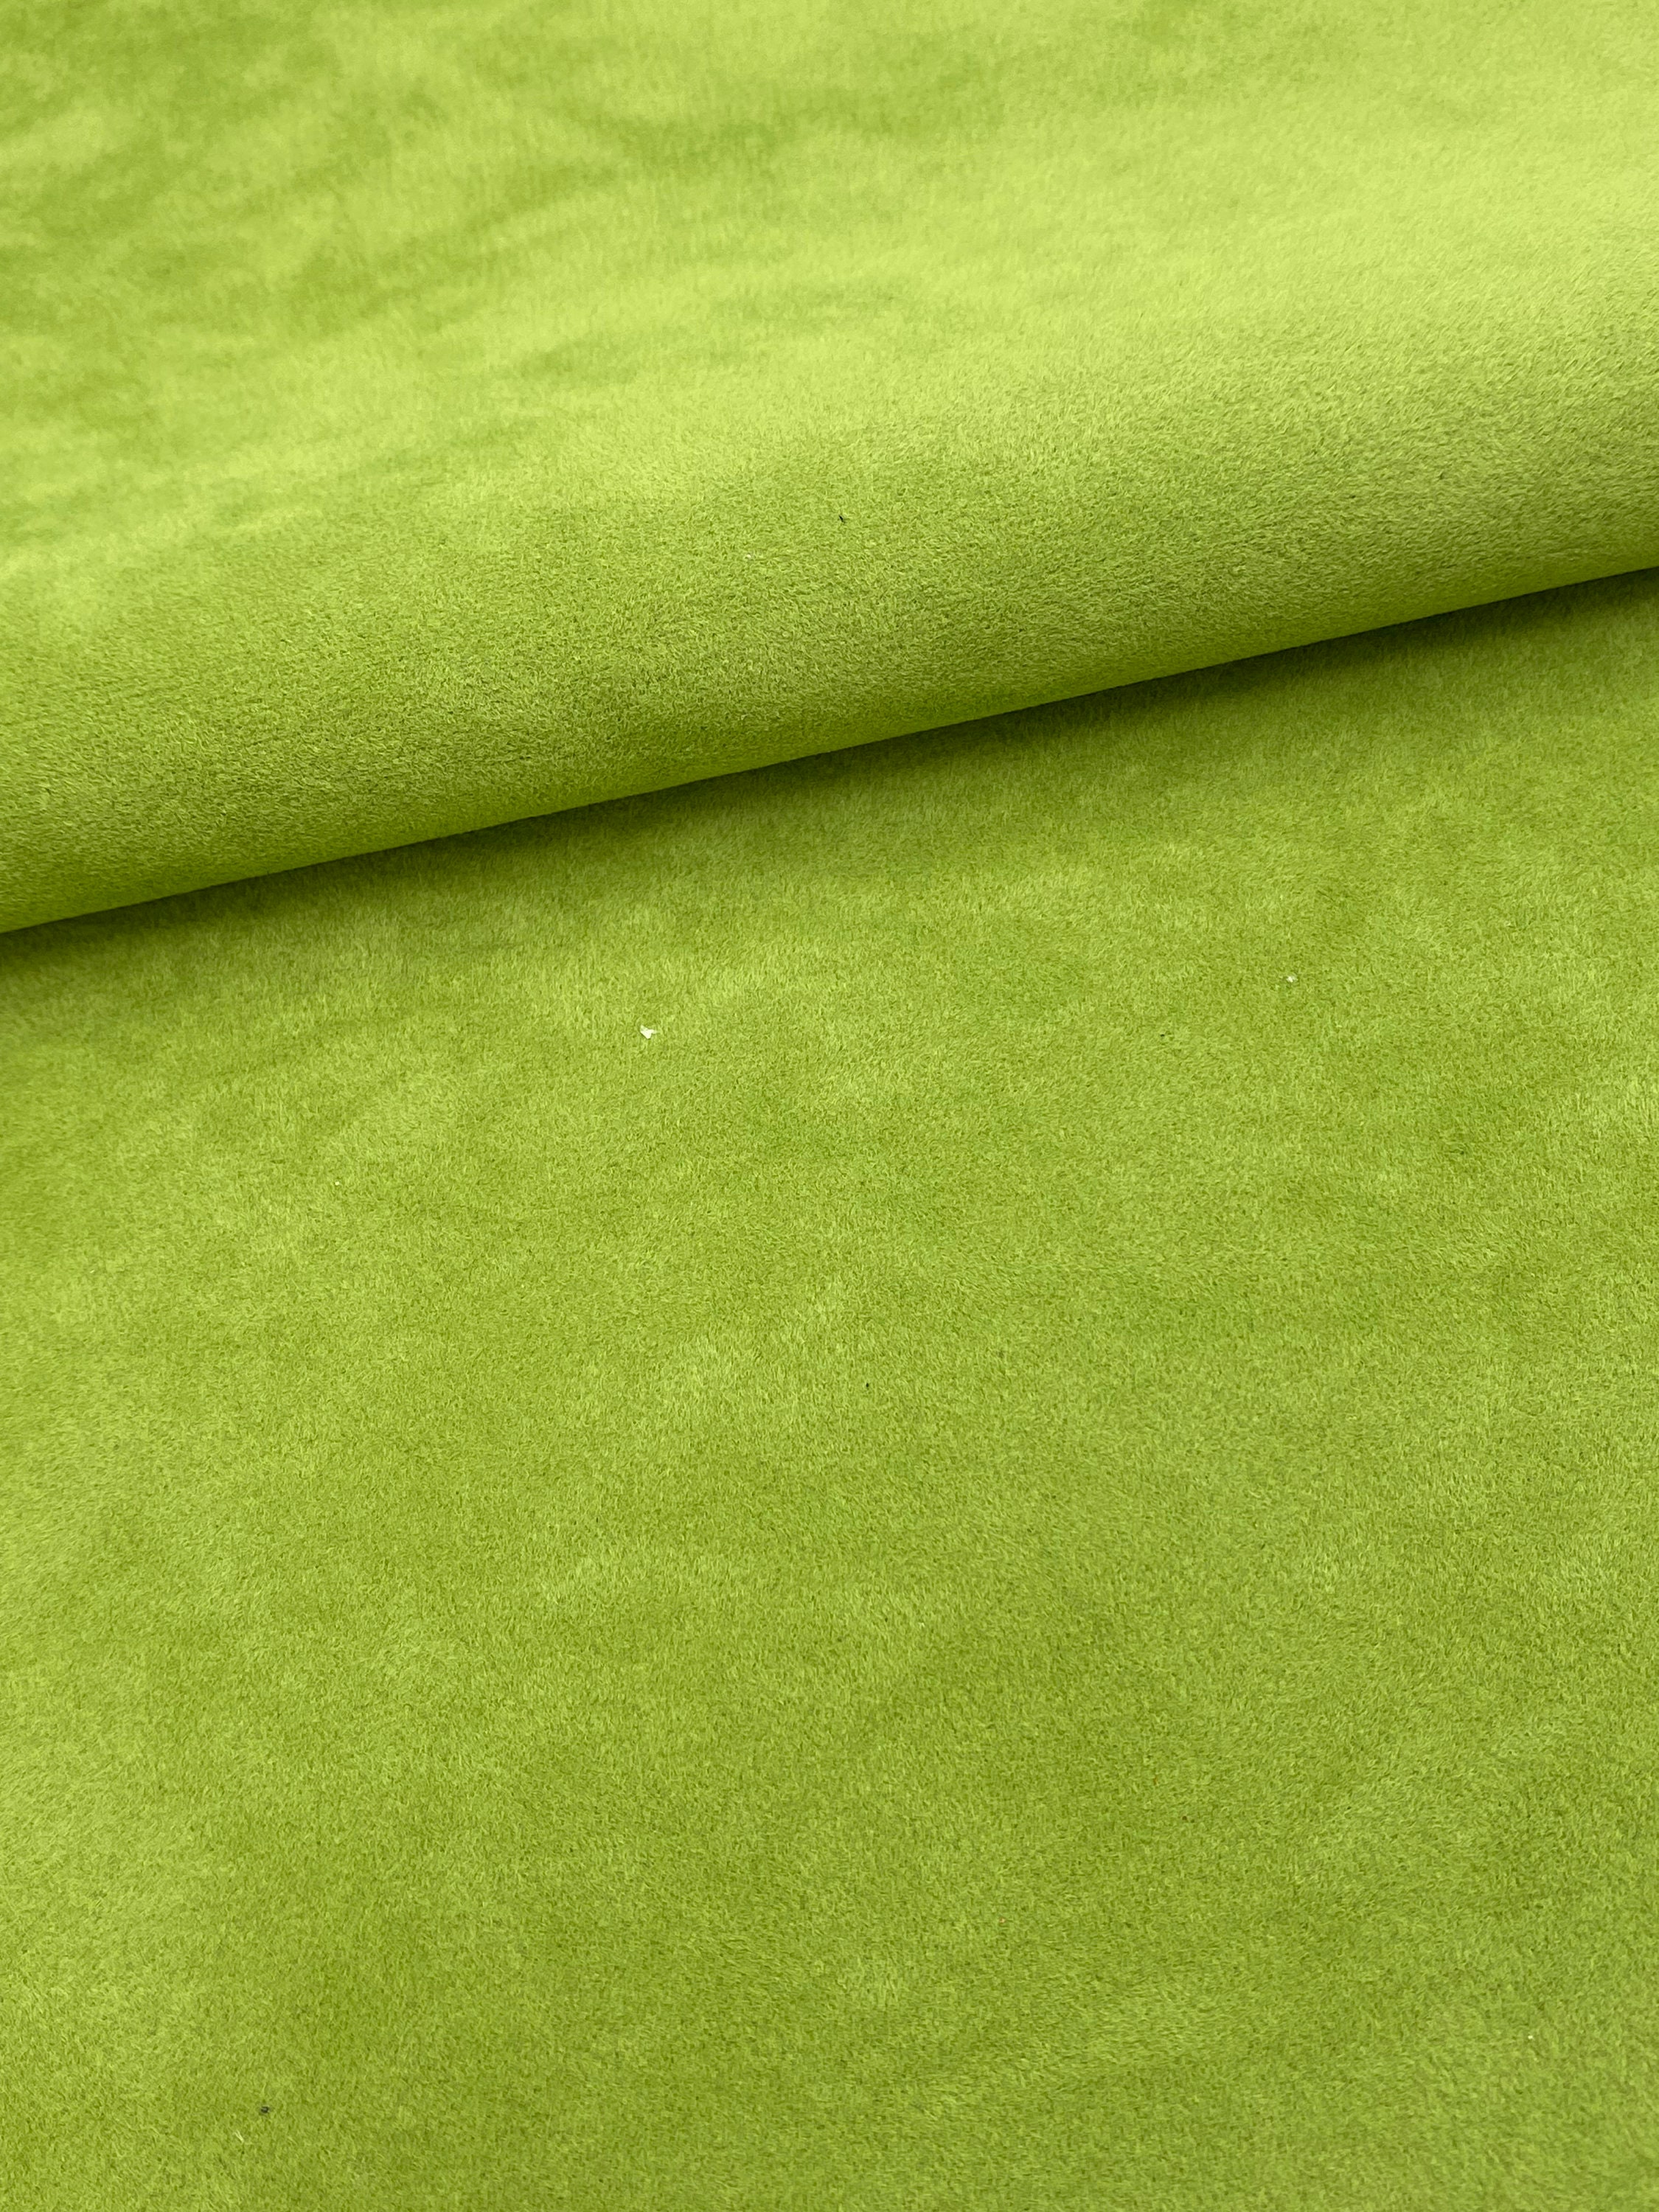 Green Suede Fabric - Etsy